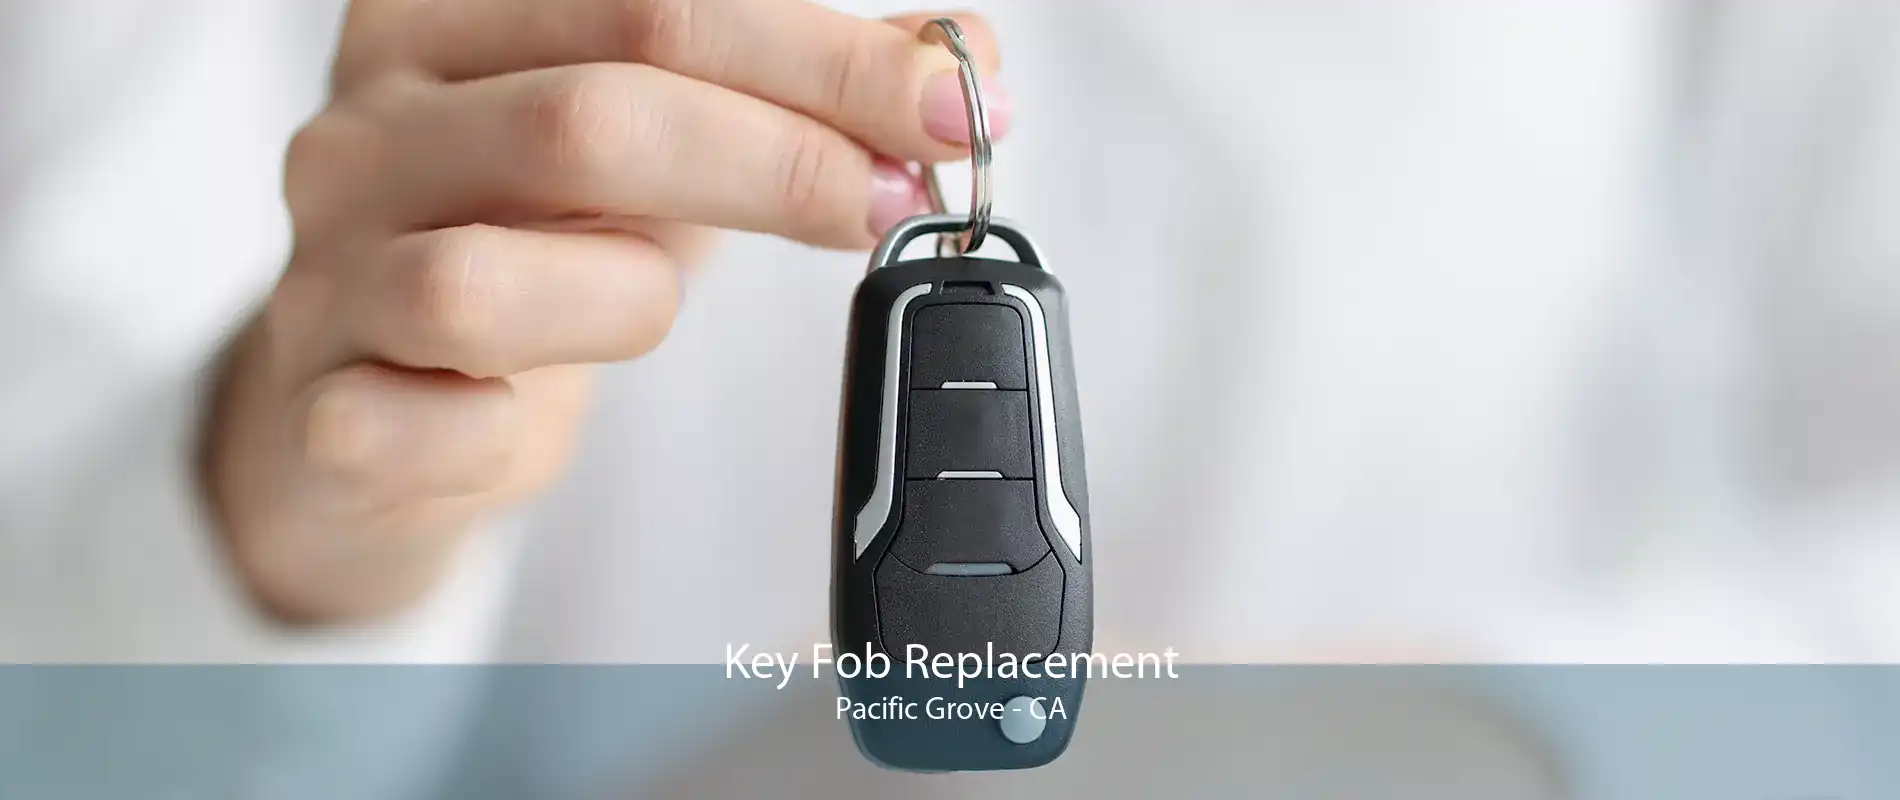 Key Fob Replacement Pacific Grove - CA